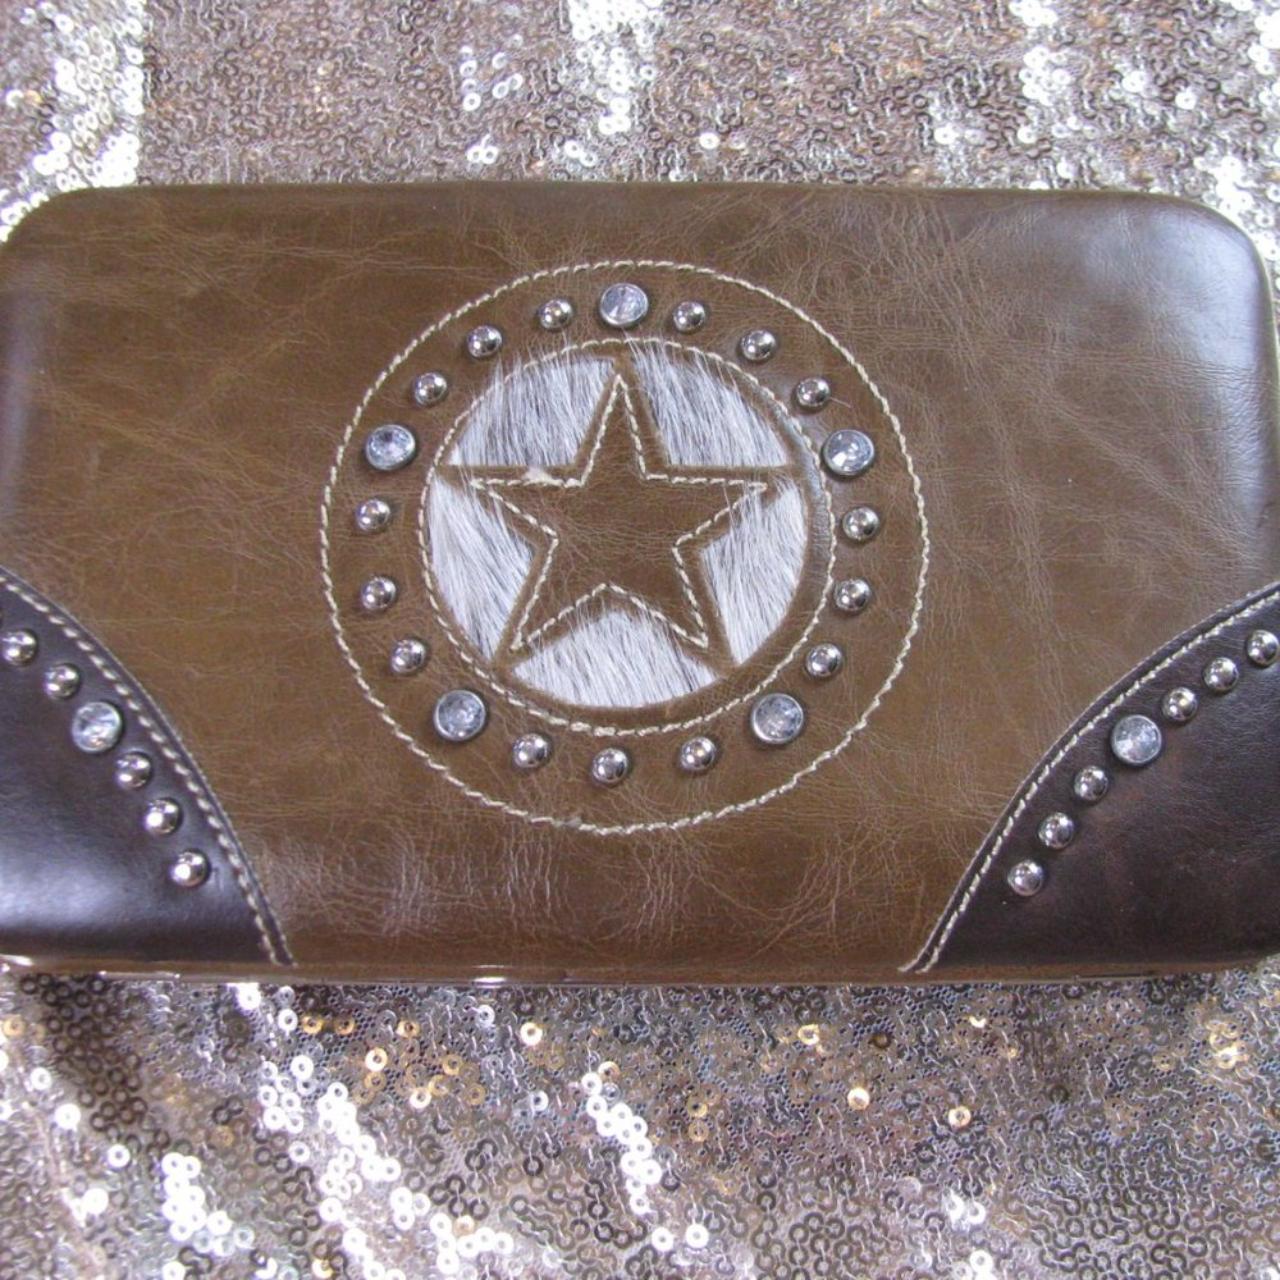 Product Image 1 - Country Road  brown wallet
Hard